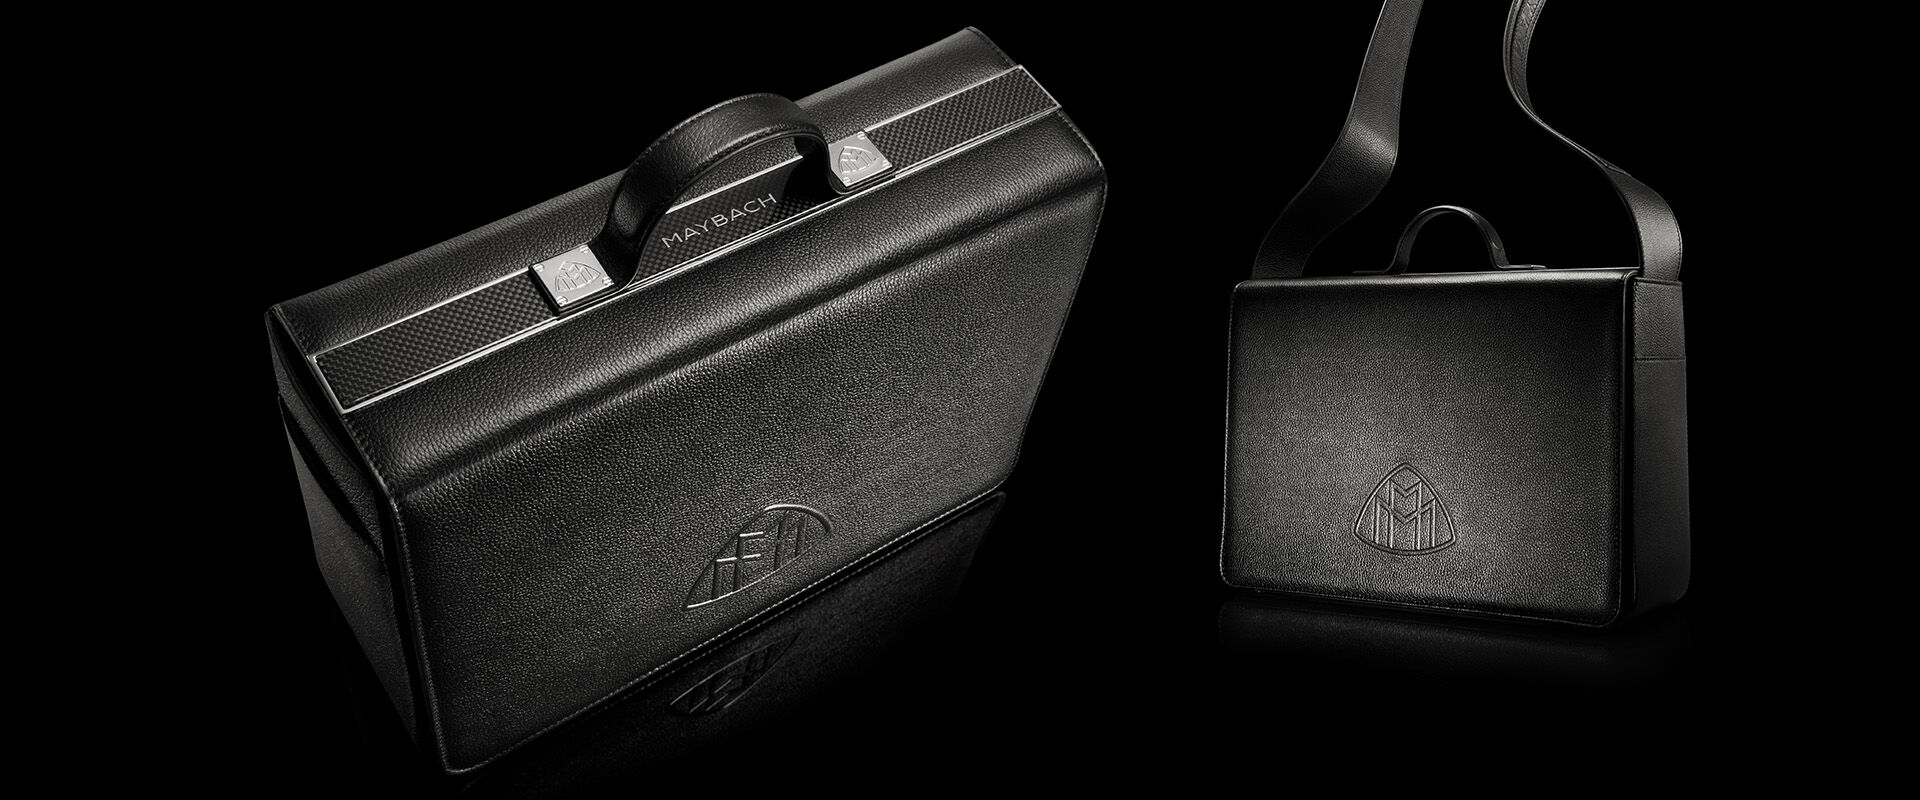 MAYBACH Accesories - Leather business bags made in Germany